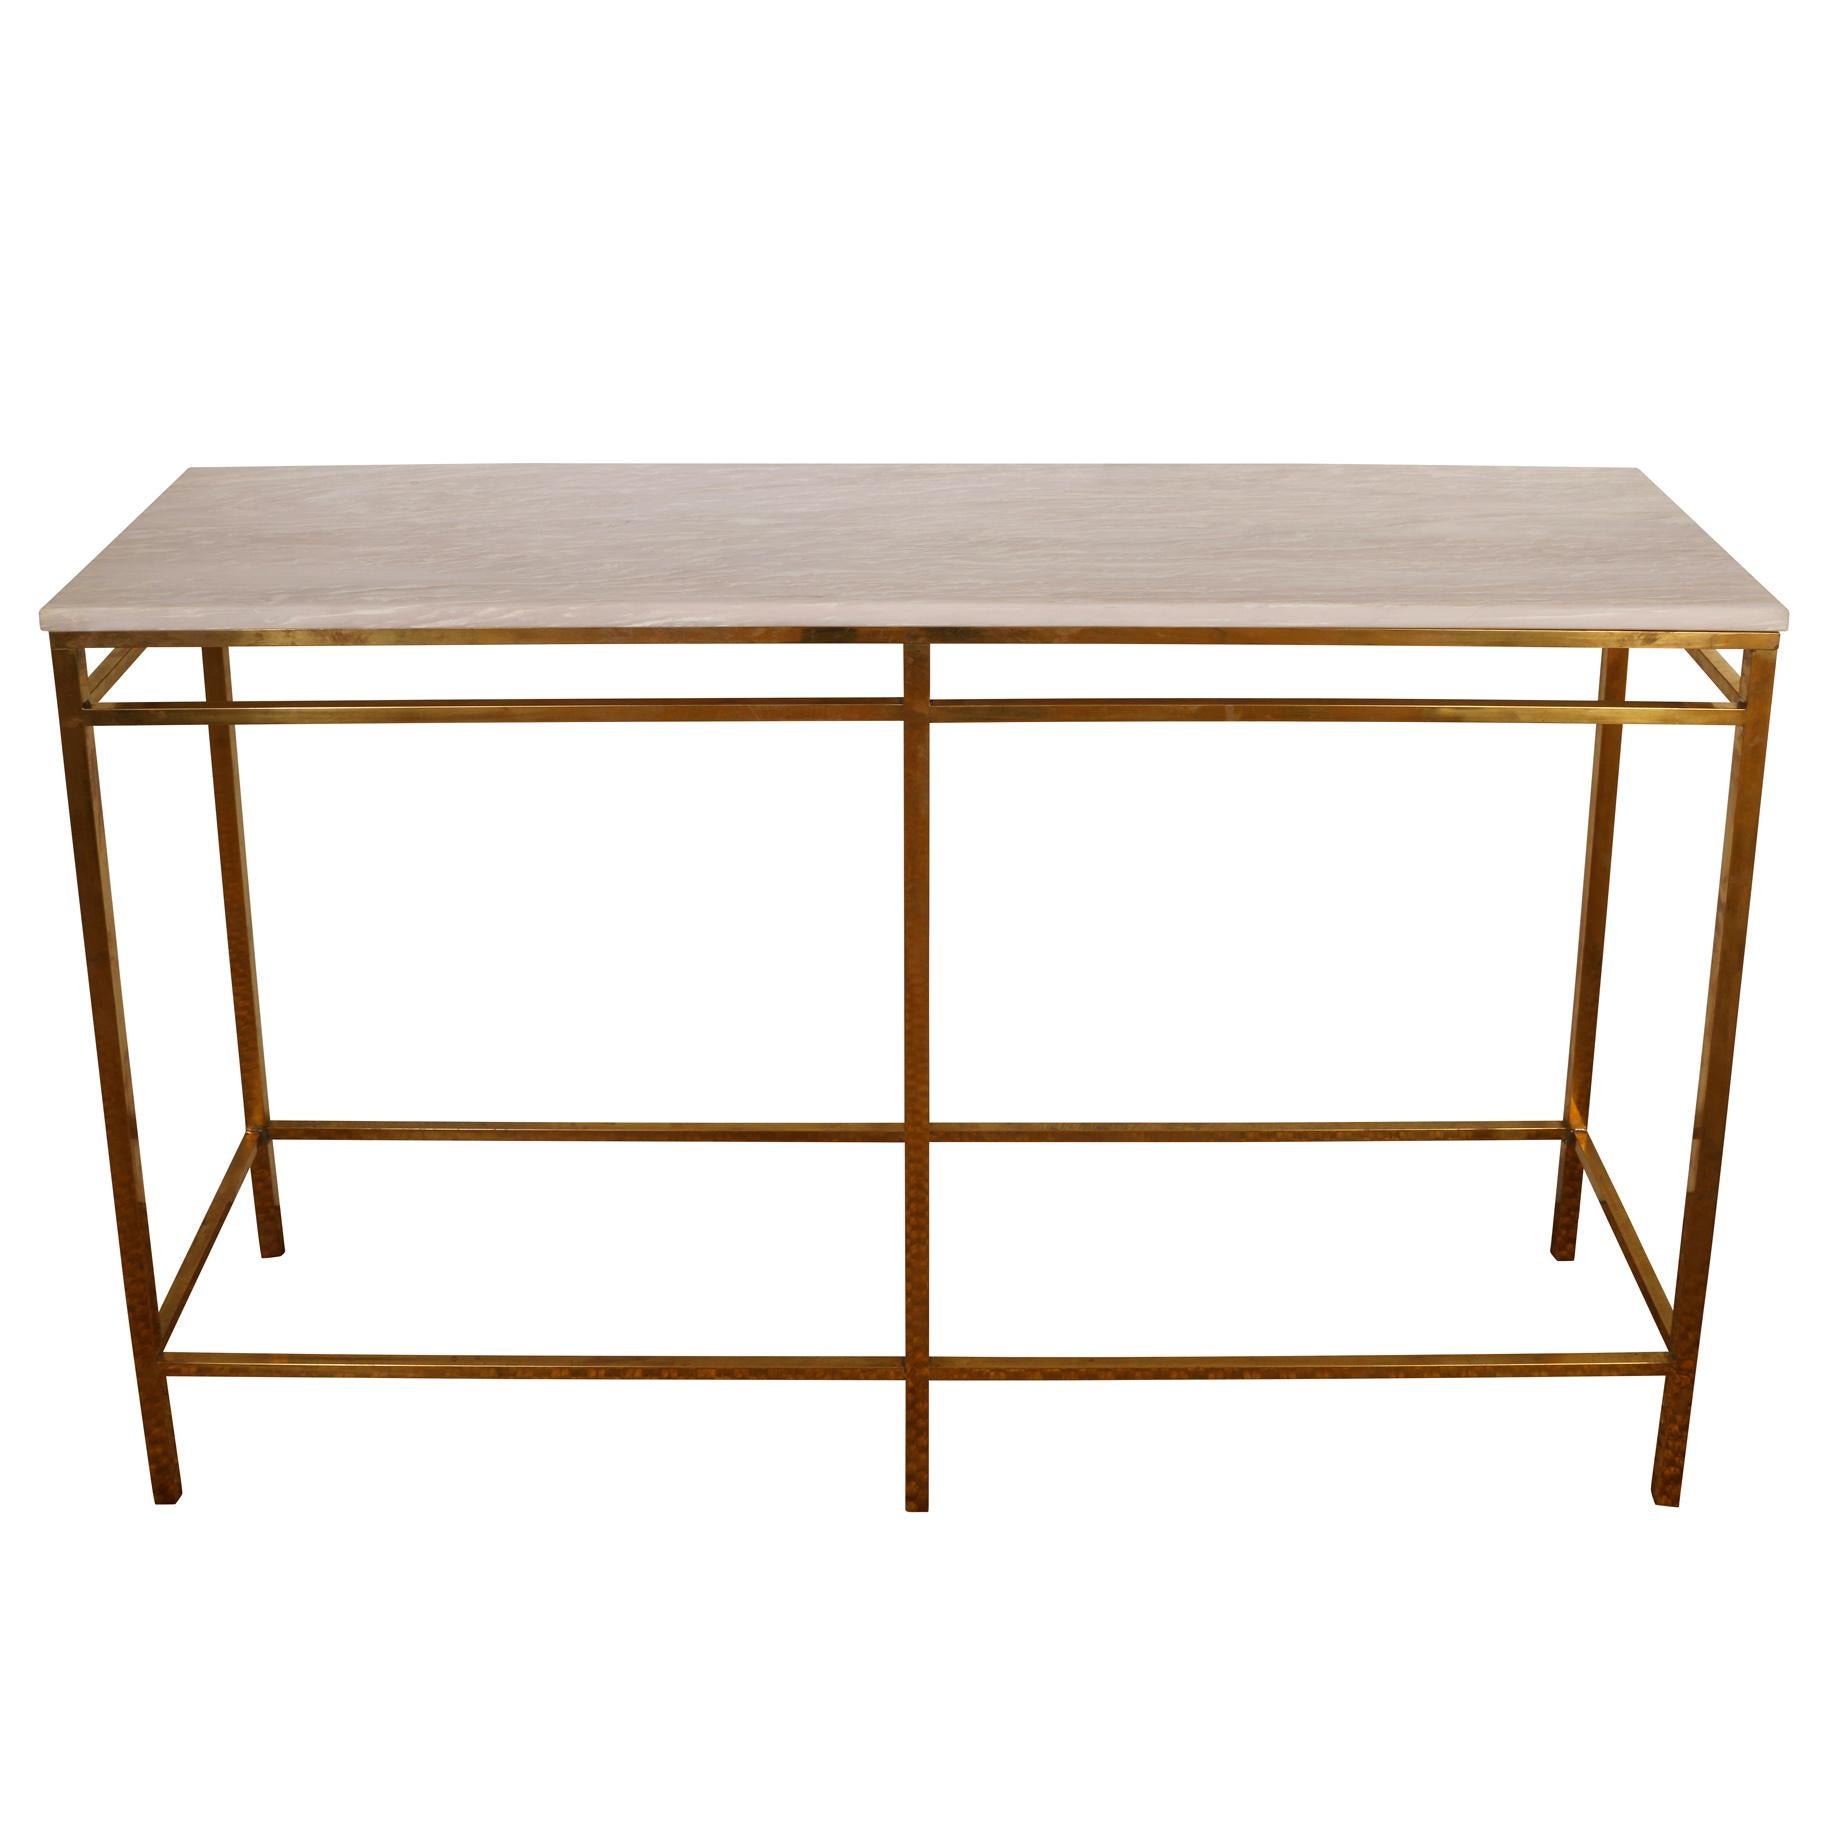 A pair of Italian brass and travertine console tables with clean geometric lines.